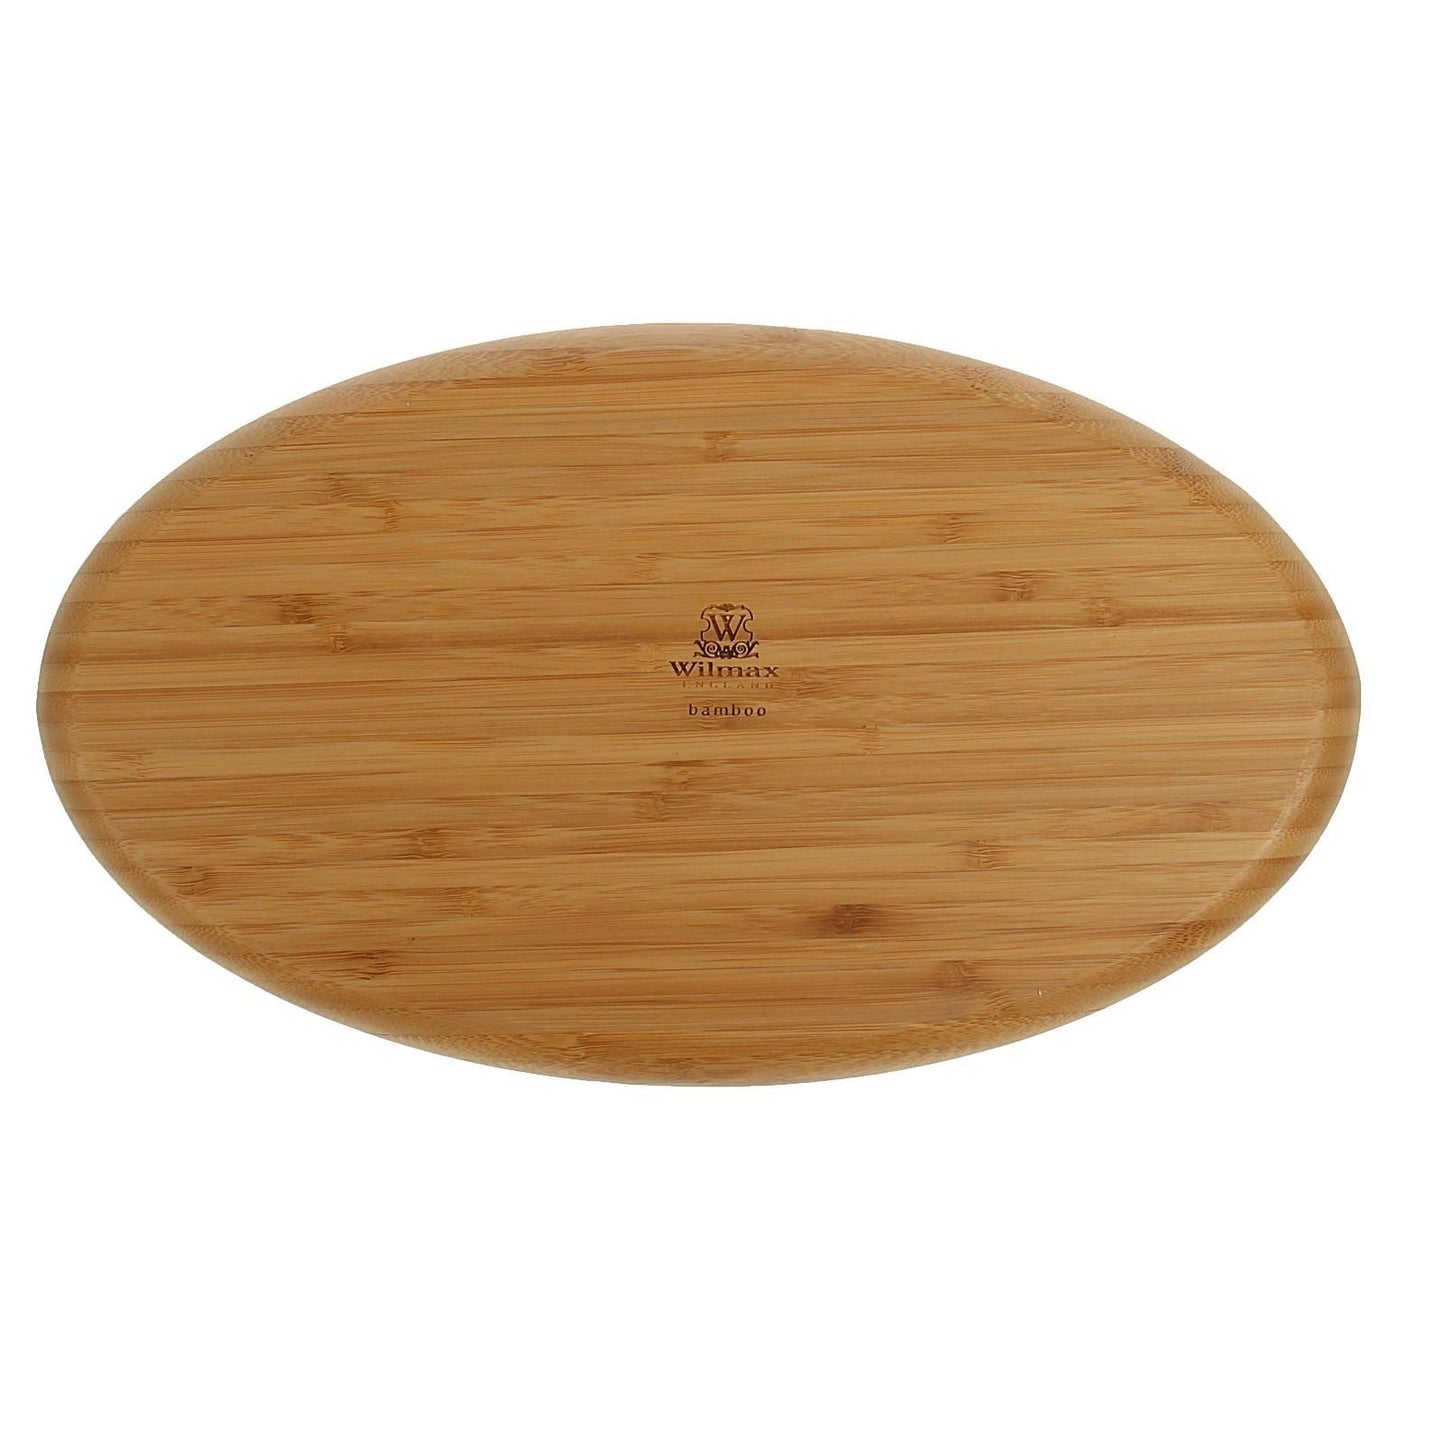 Bamboo 3 Section Platter 14" inch X 8" inch -5